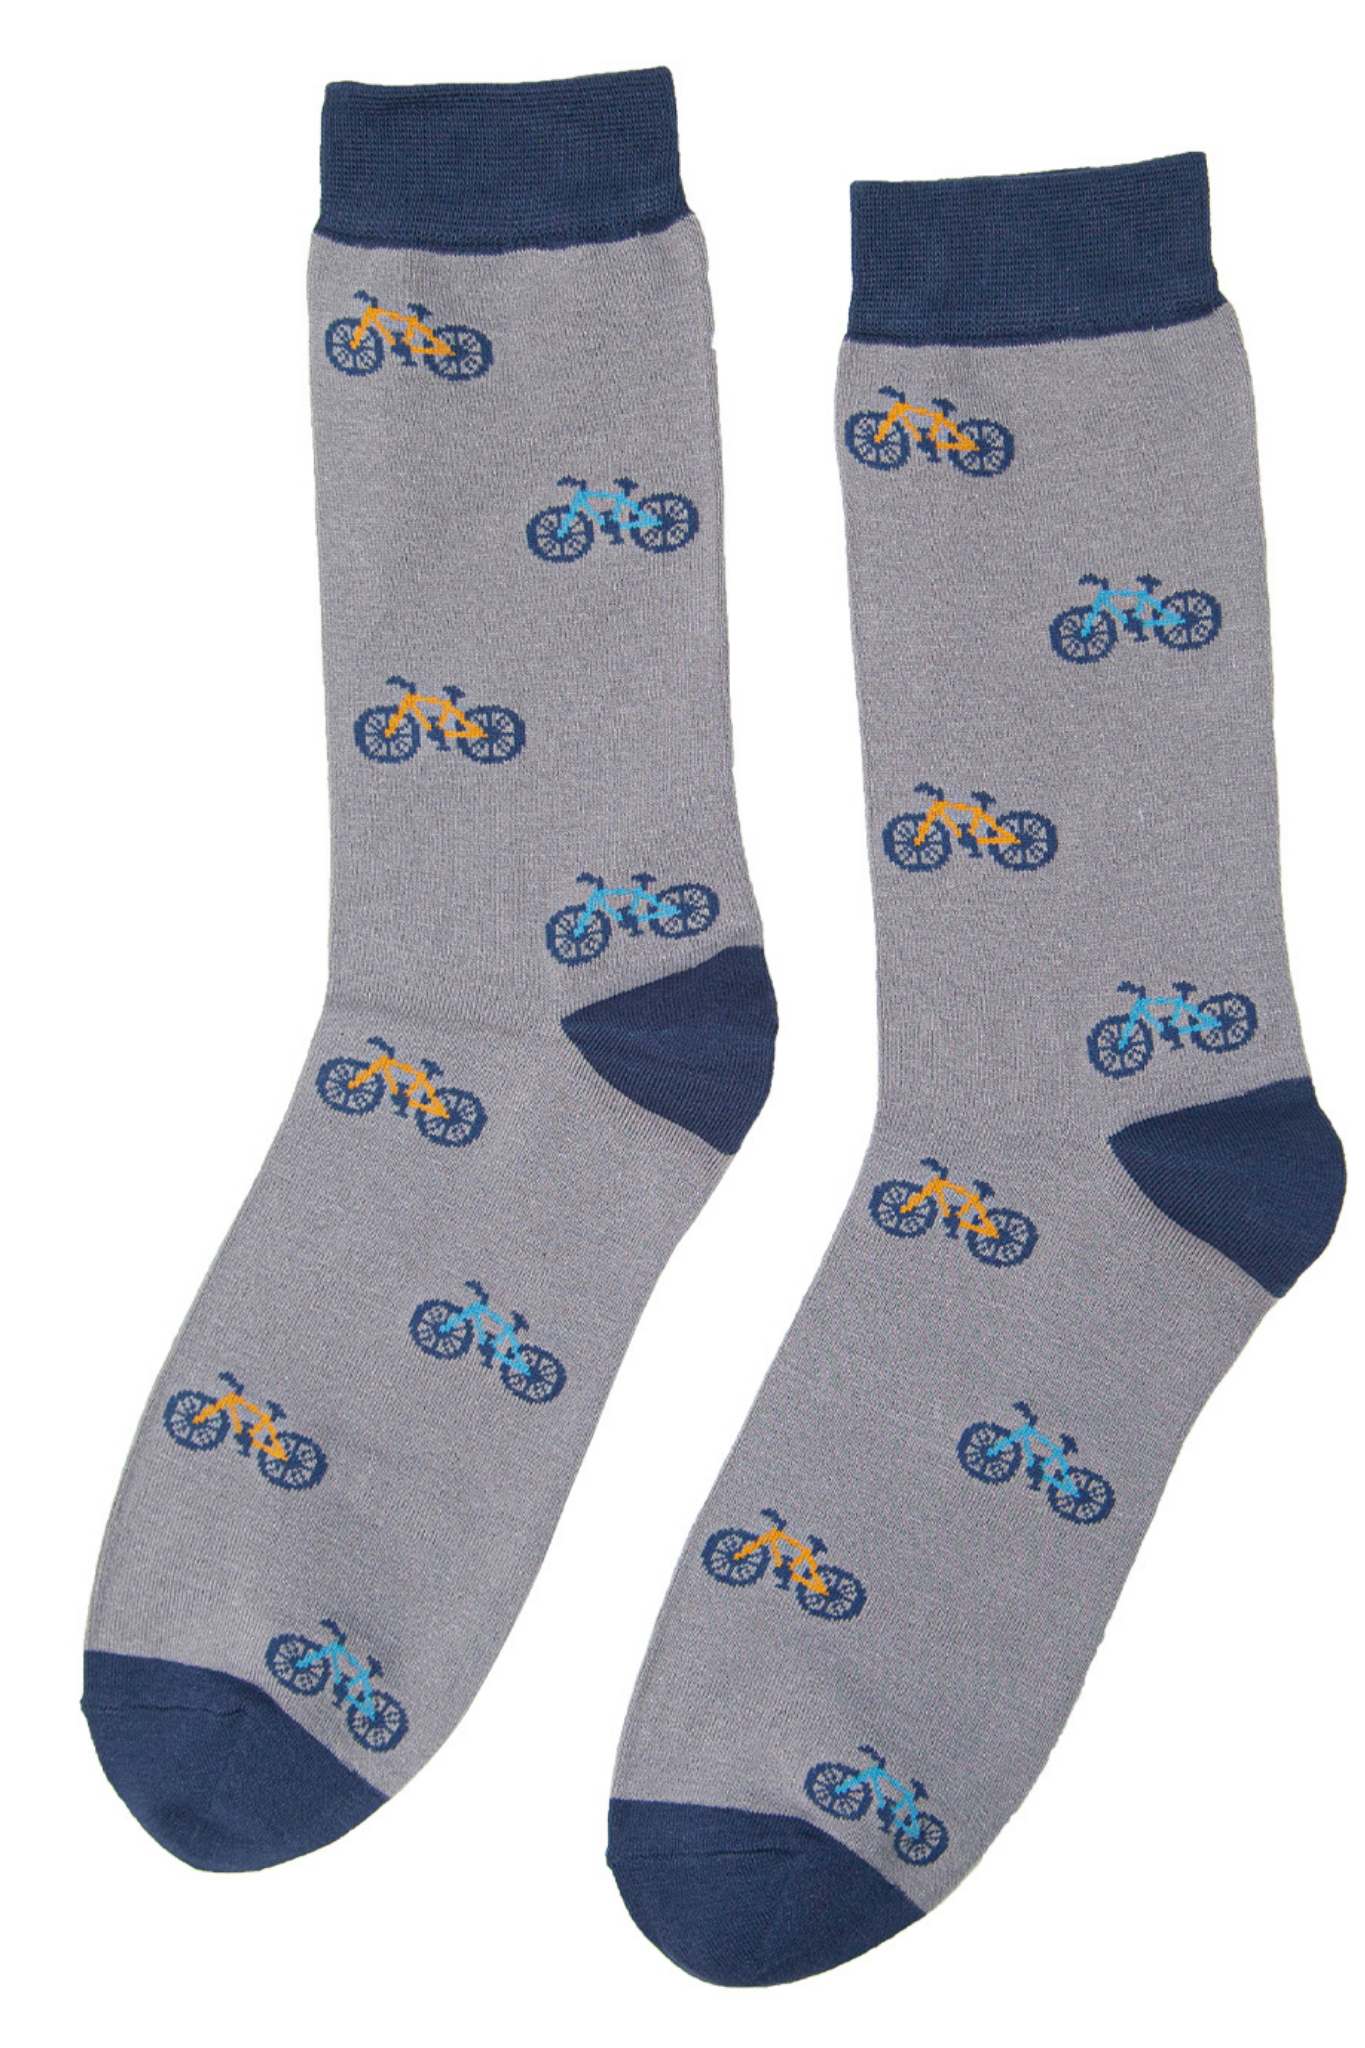 grey socks with navy blue heel, toe and trim with all over bicycle print